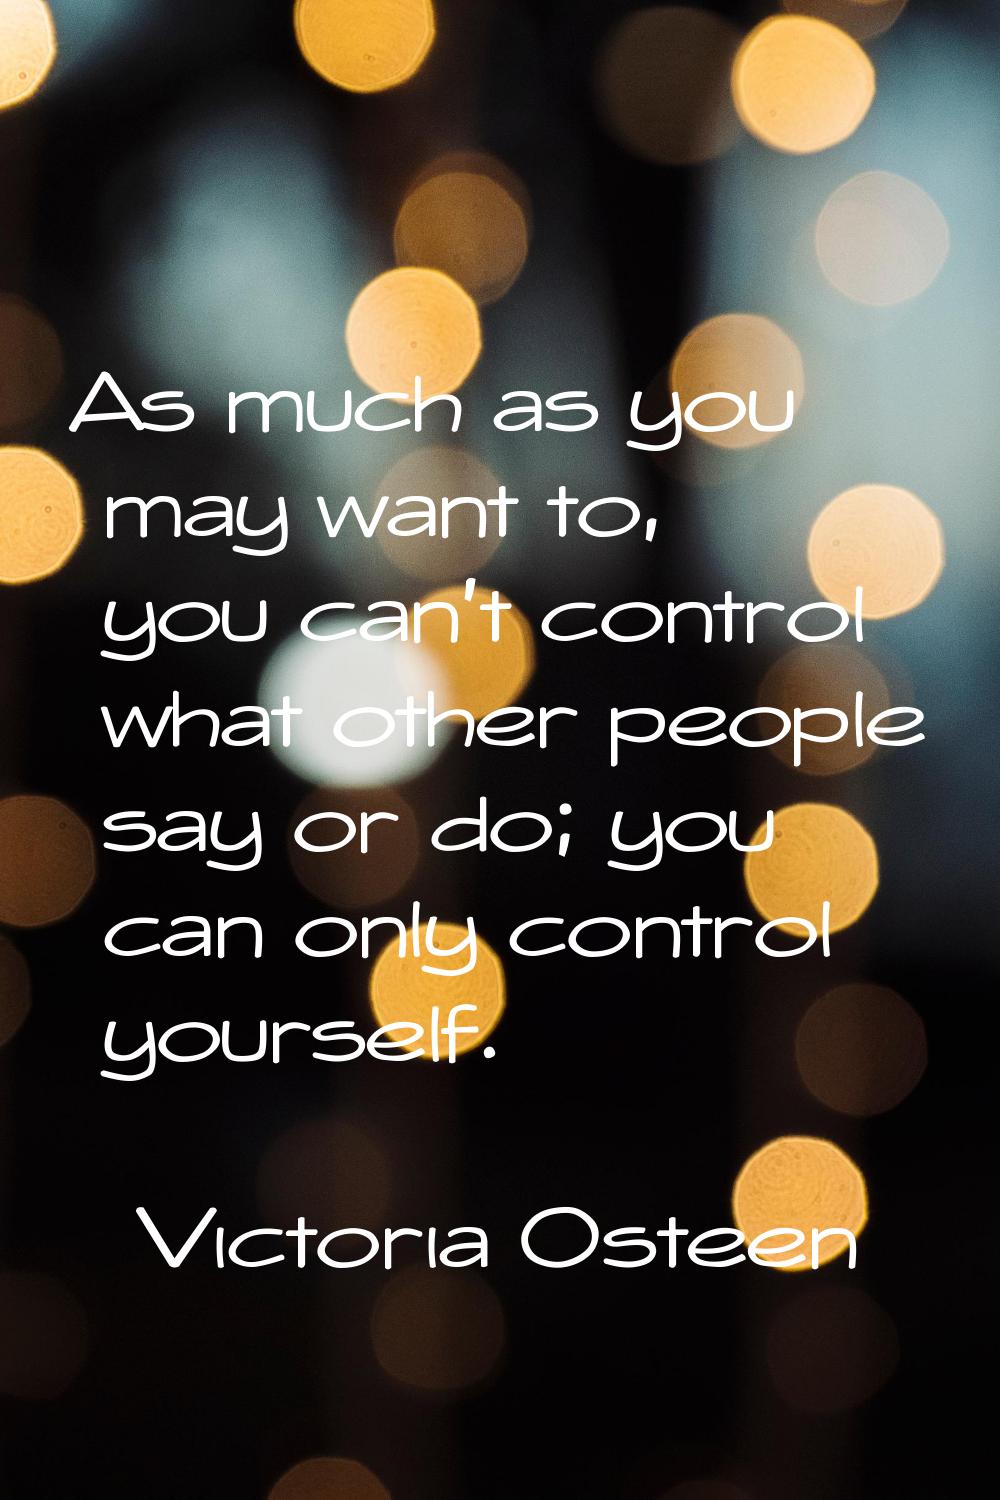 As much as you may want to, you can't control what other people say or do; you can only control you